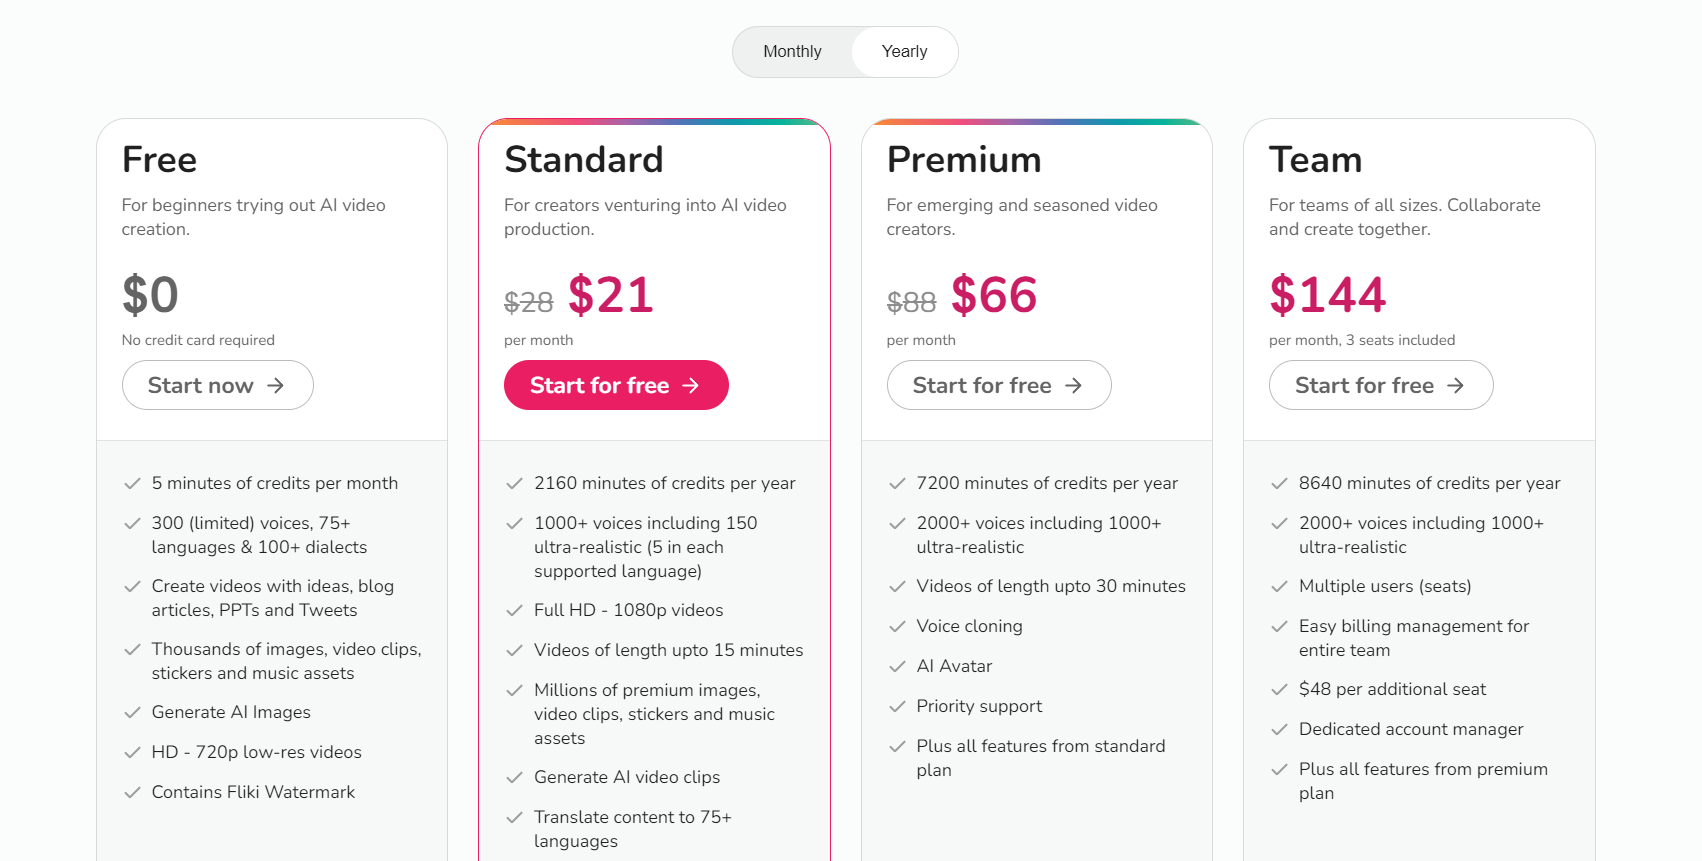 pricing-page-with-subscription-plans-and-service-prices-displayed-for-users-in-